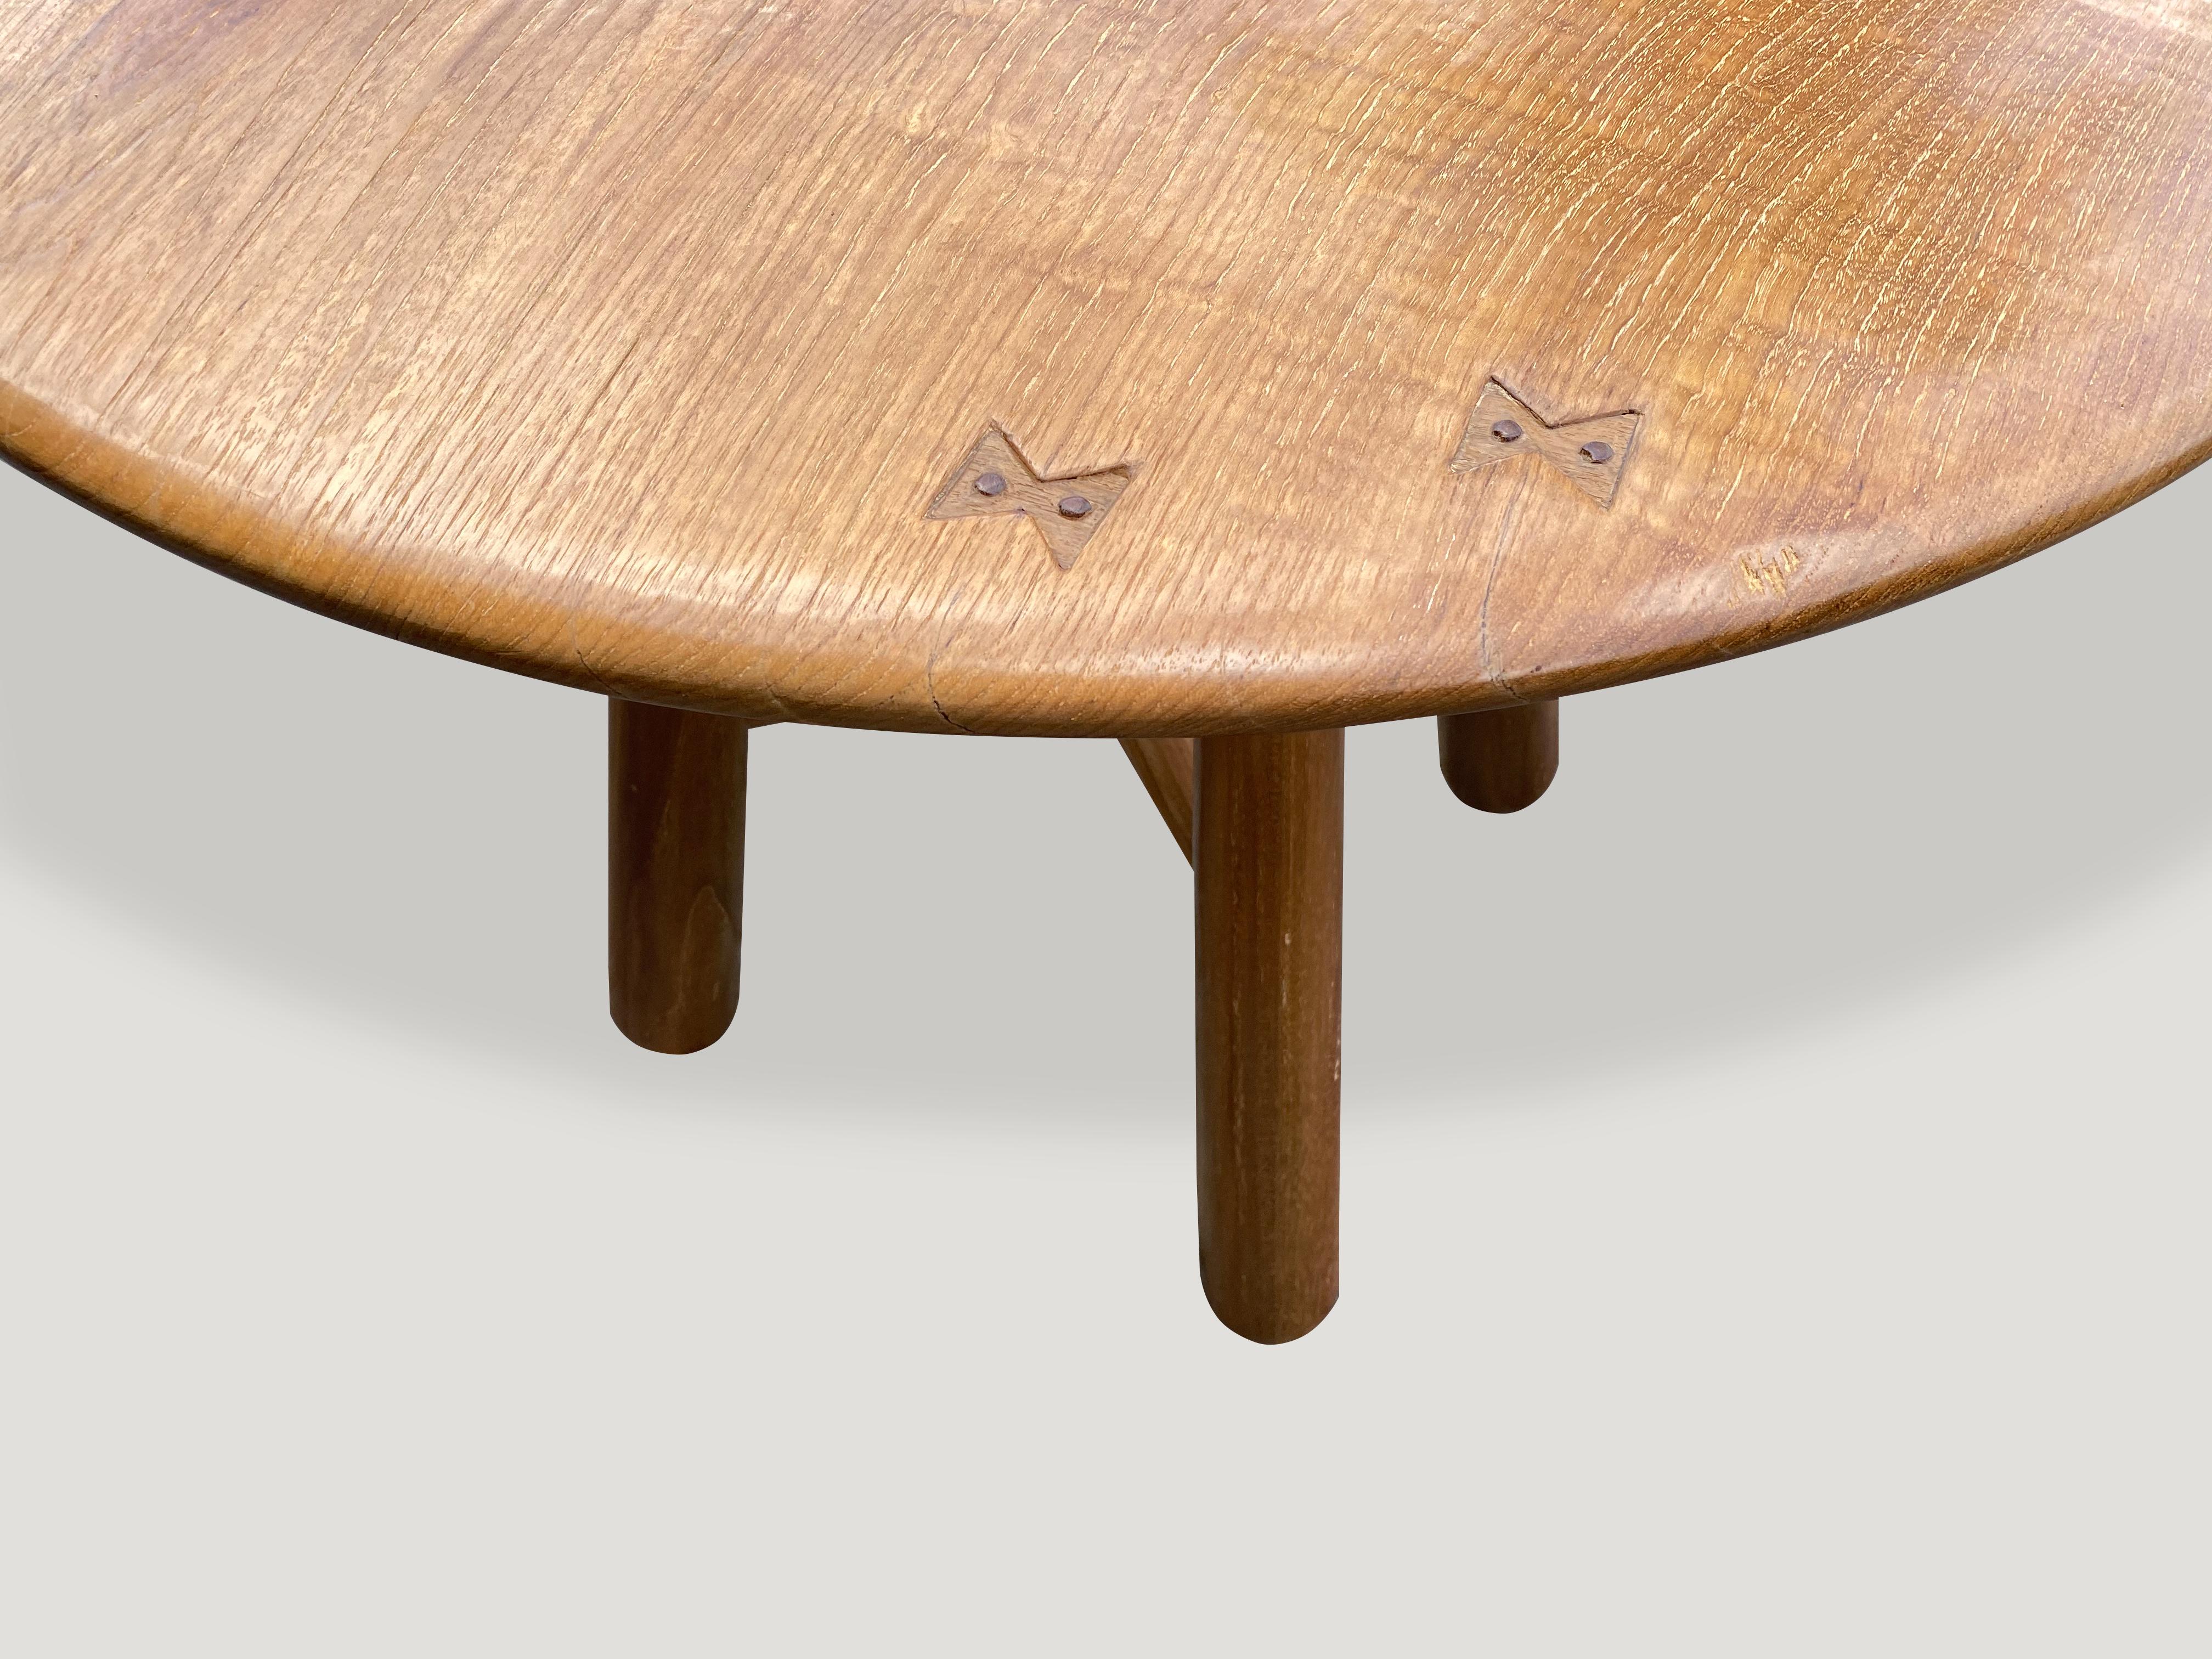 Mid-20th Century Andrianna Shamaris Midcentury Couture Round Teak Table with Butterflies Inlaid